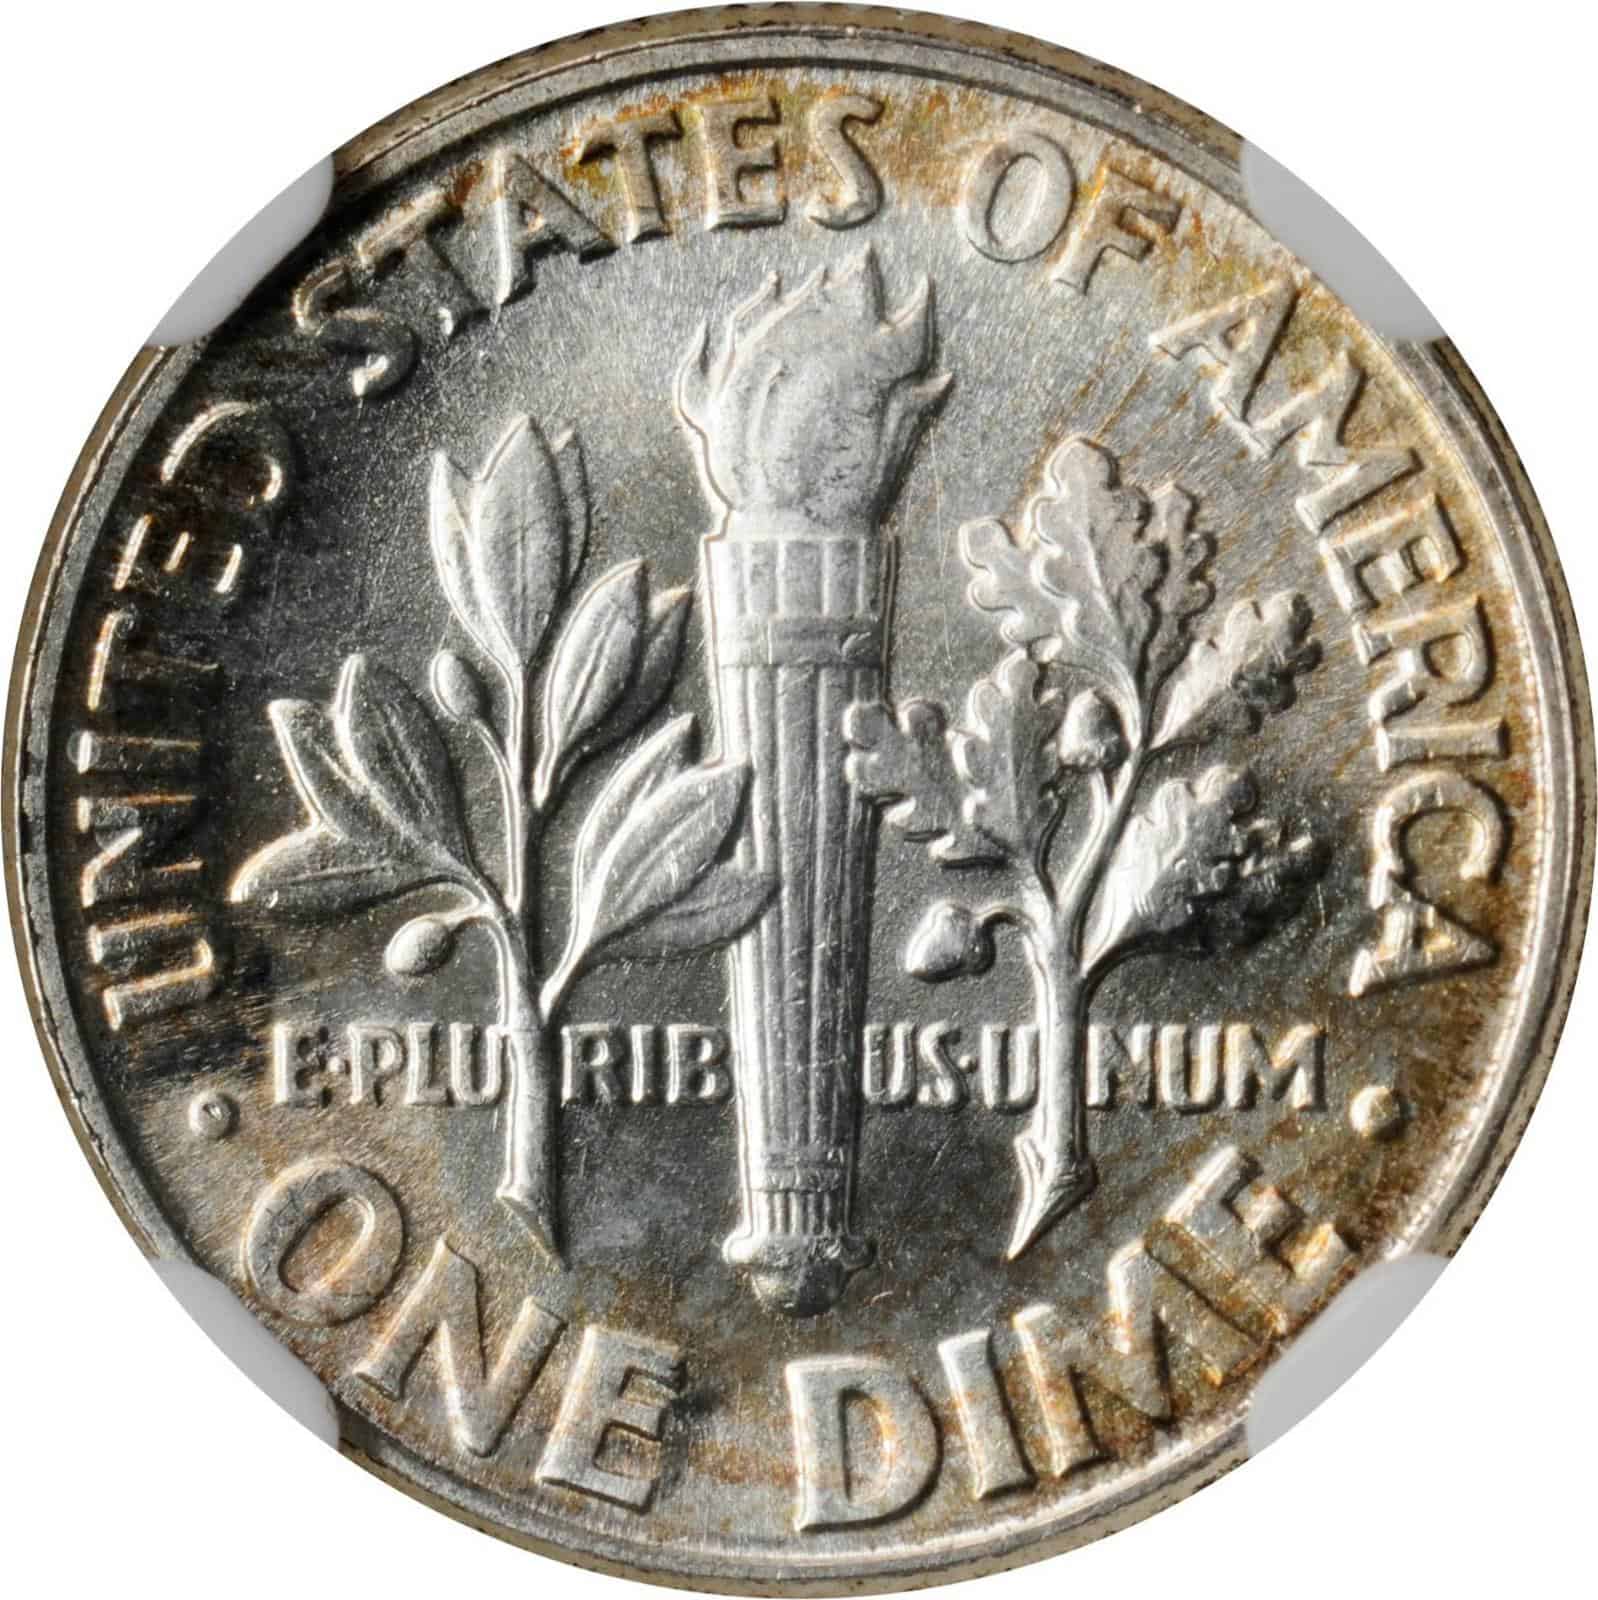 The Reverse of the 1946 Dime